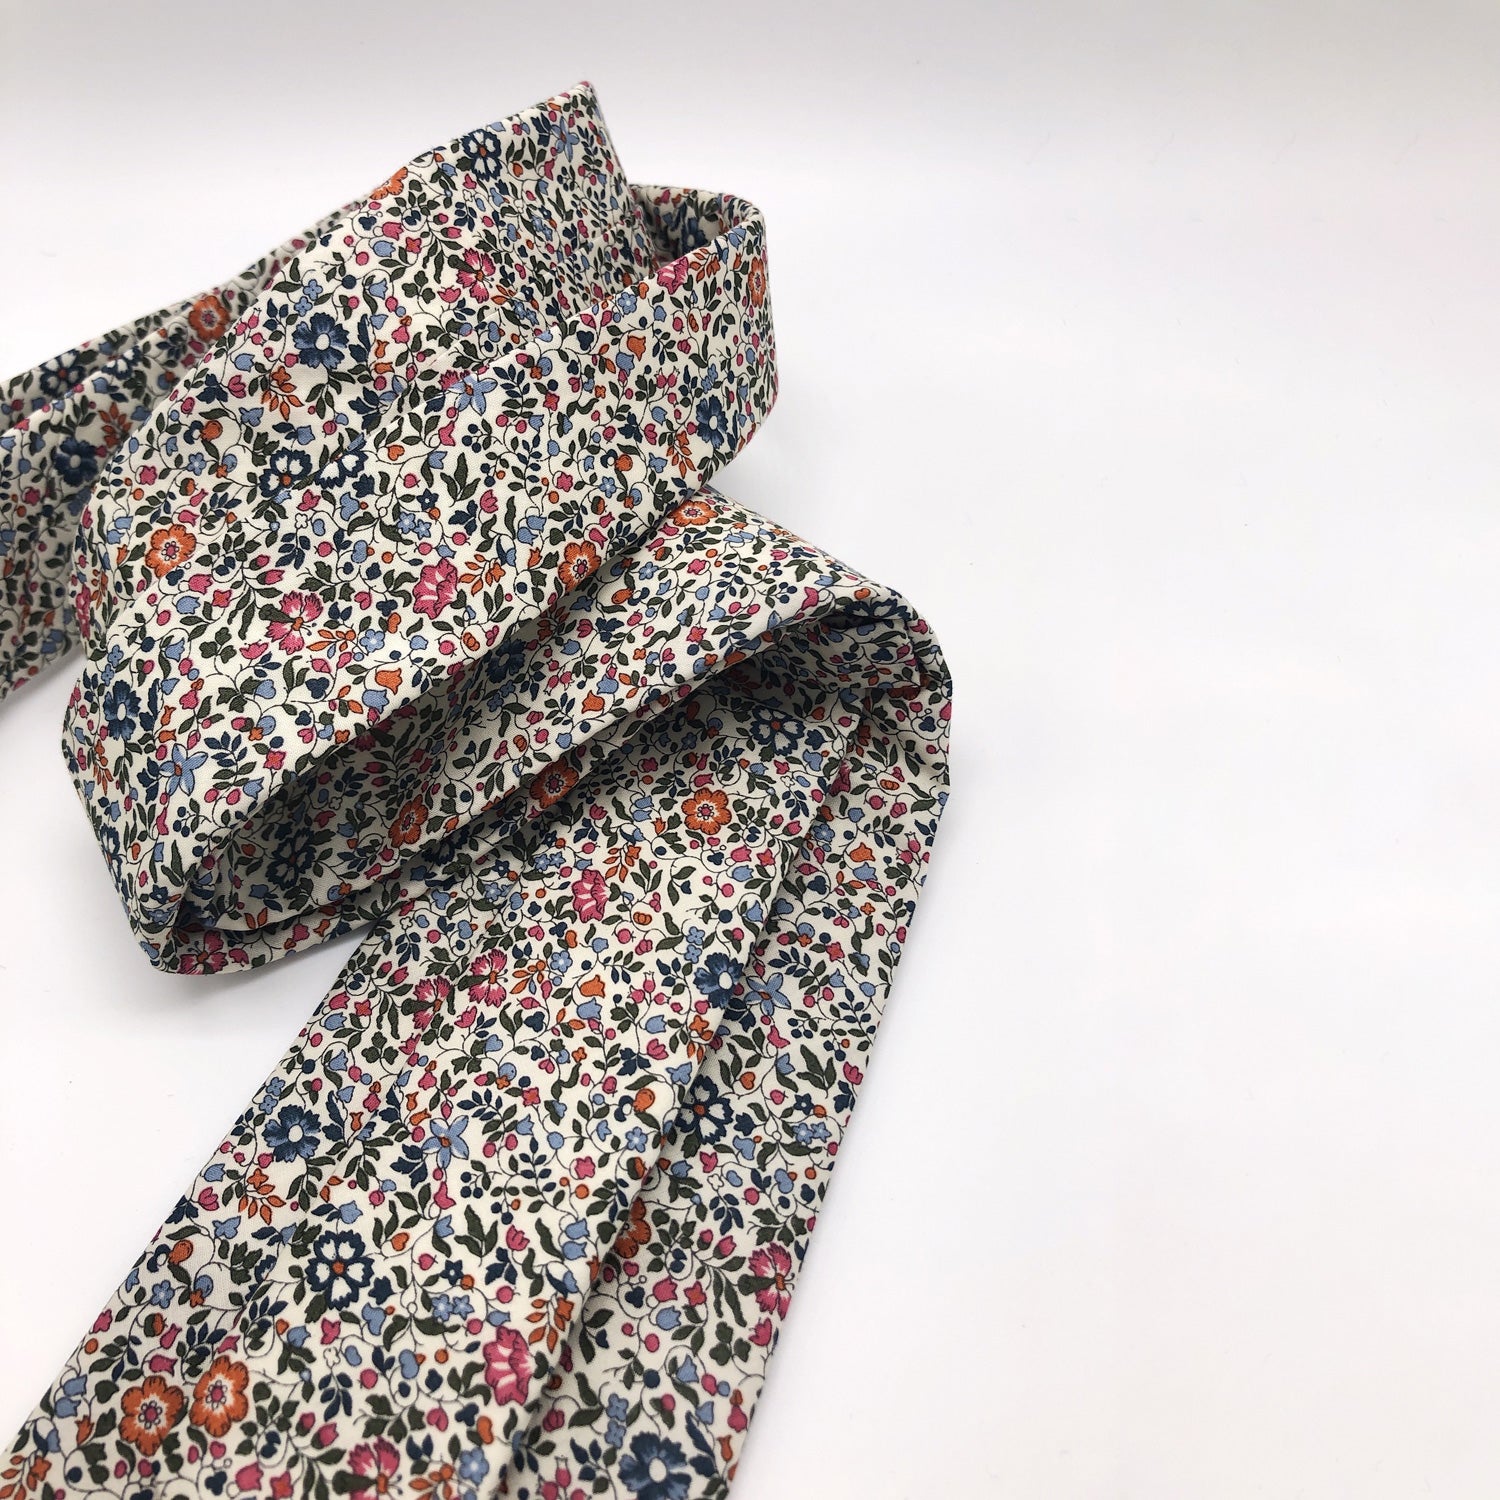 Liberty of London Tie in Burnt Orange Ditsy Floral by the Belfast Bow Company